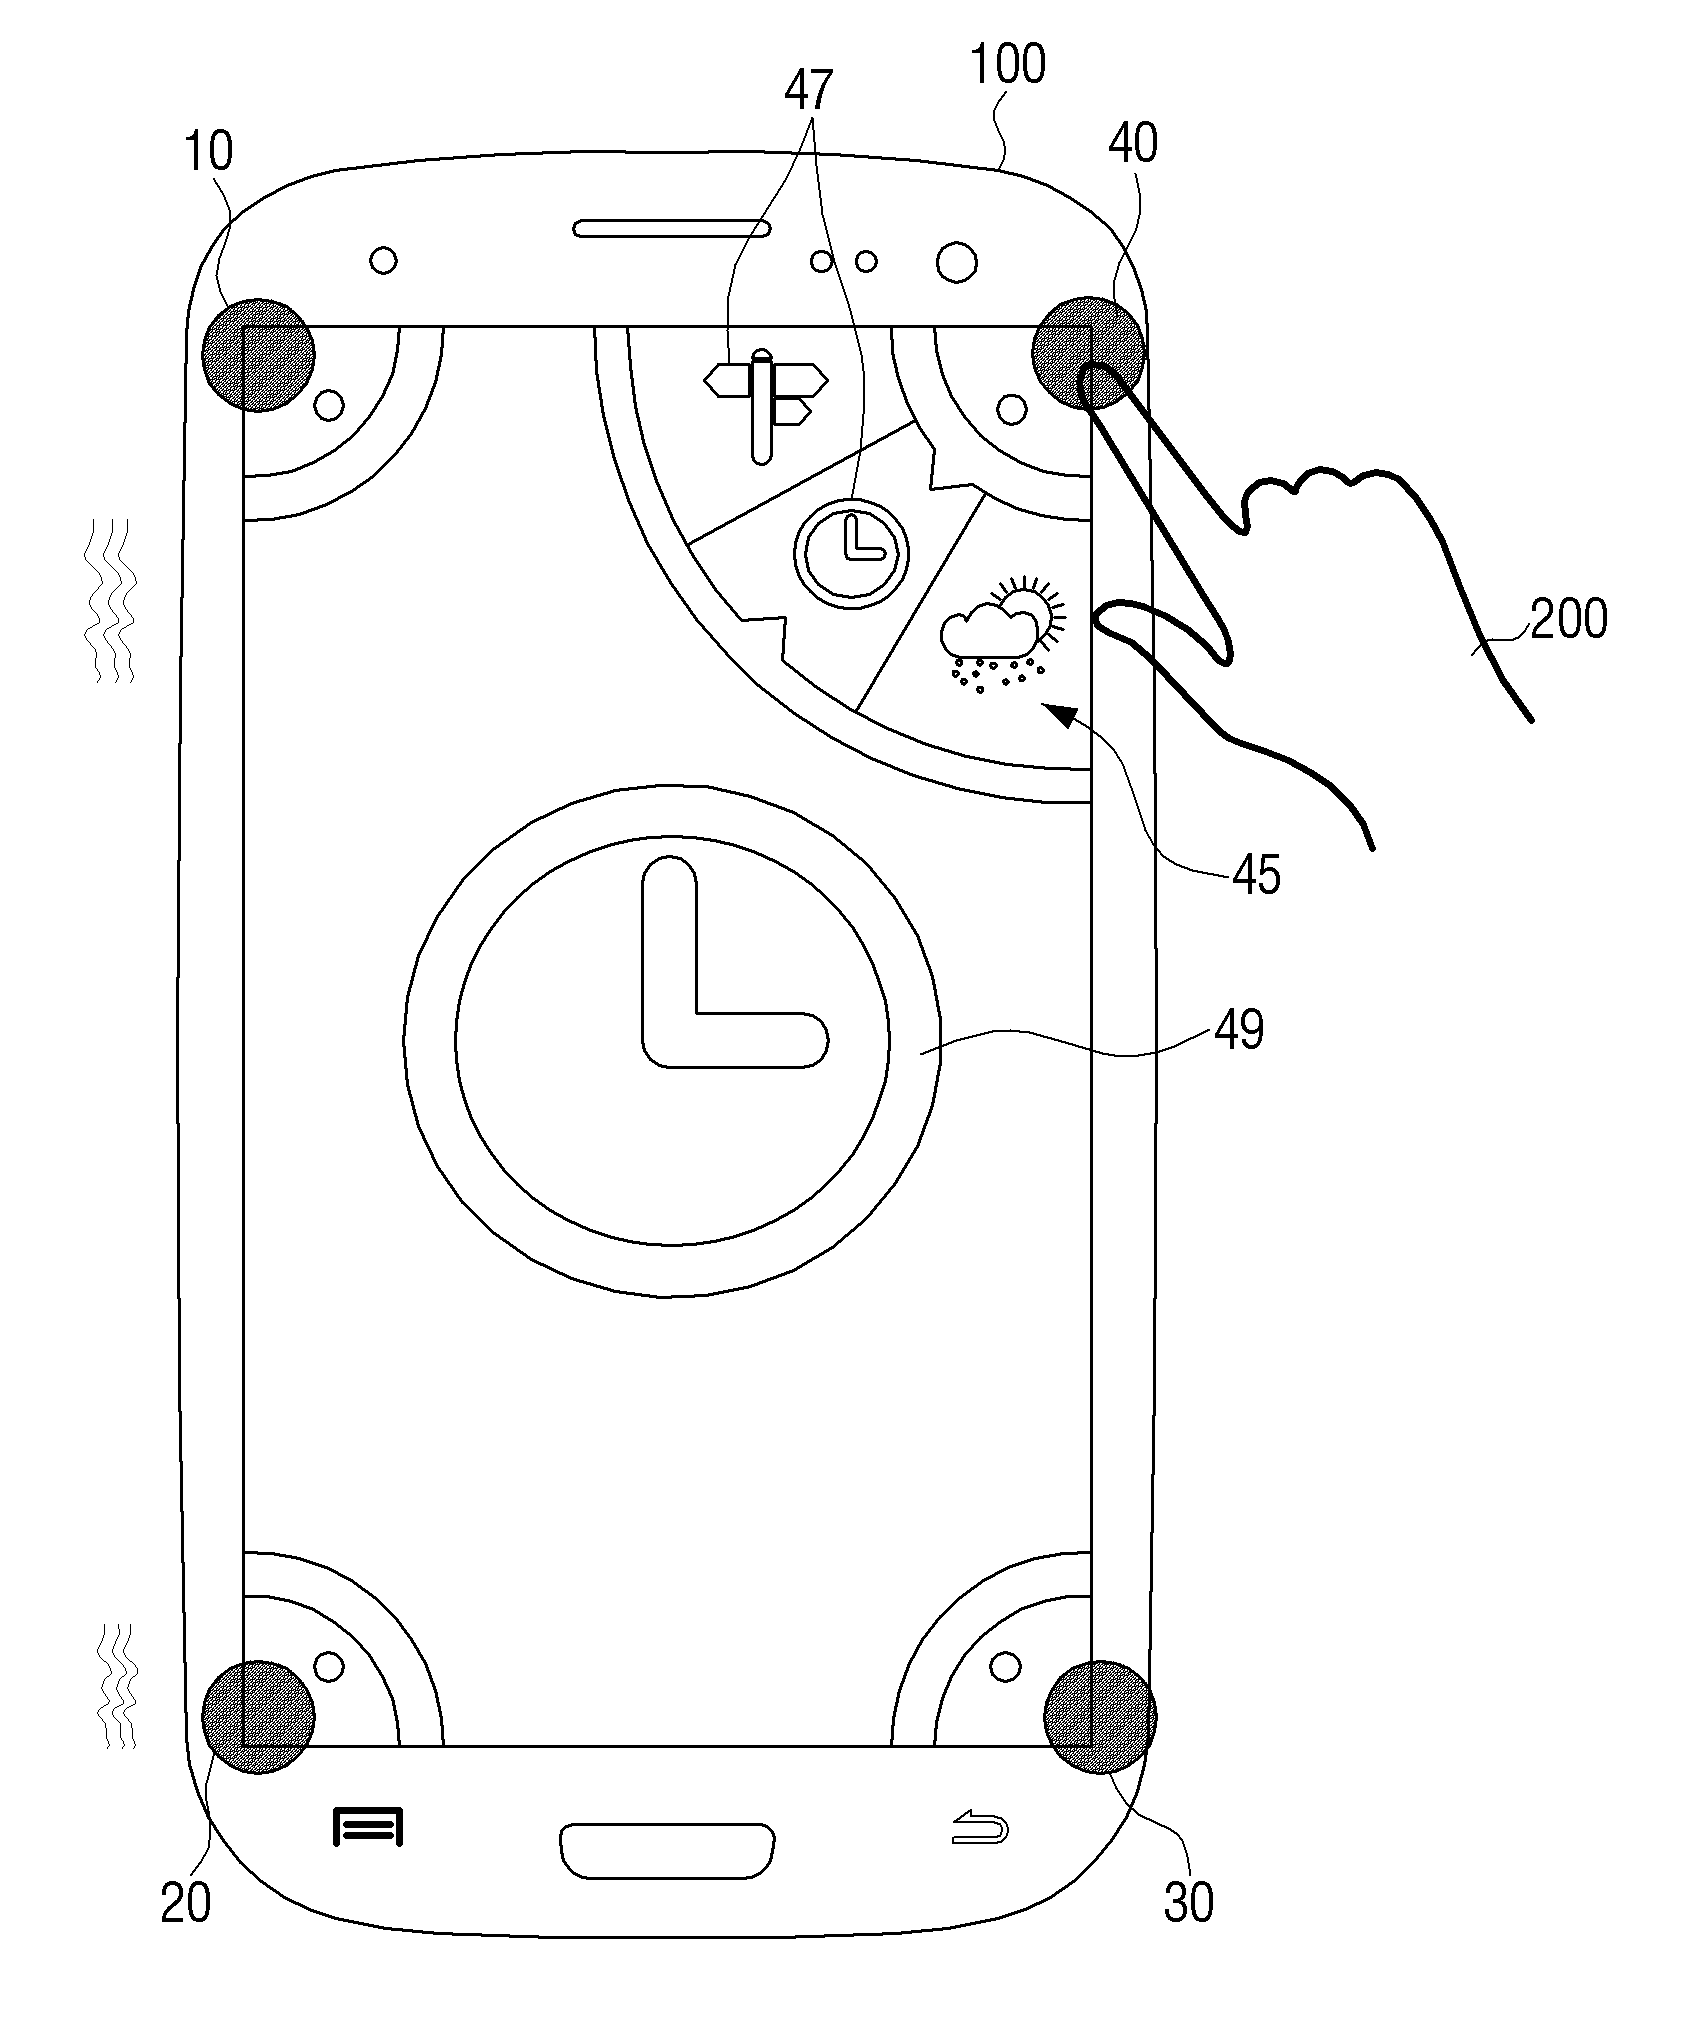 Display apparatus and method for performing function of the same